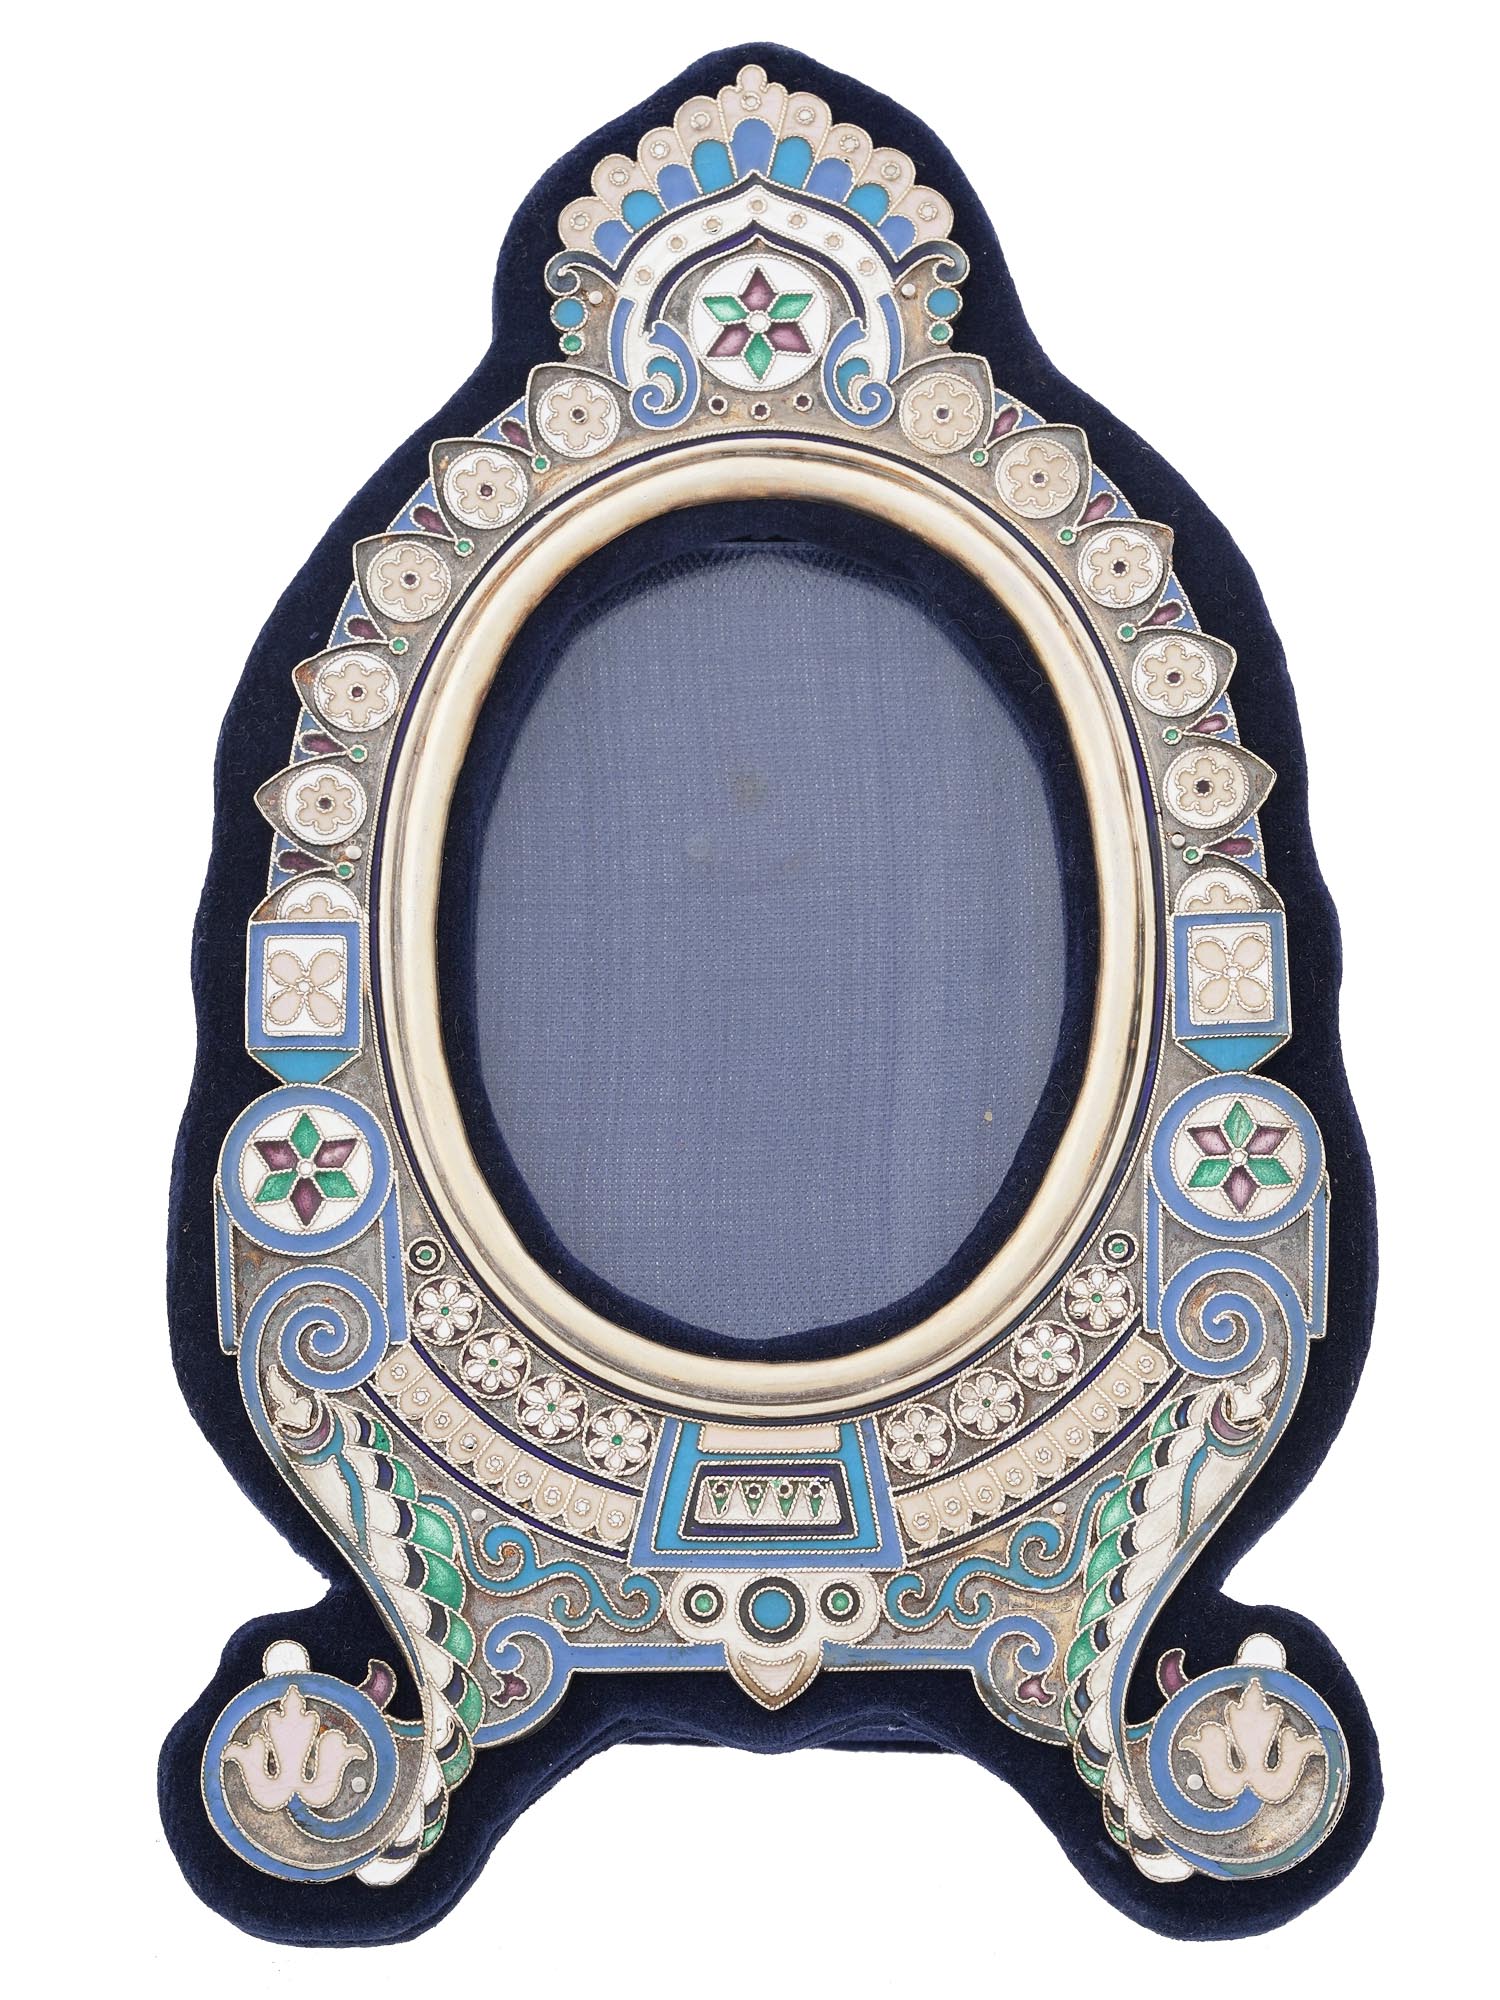 RUSSIAN SILVER AND CLOISONNE ENAMEL PHOTO FRAME PIC-1